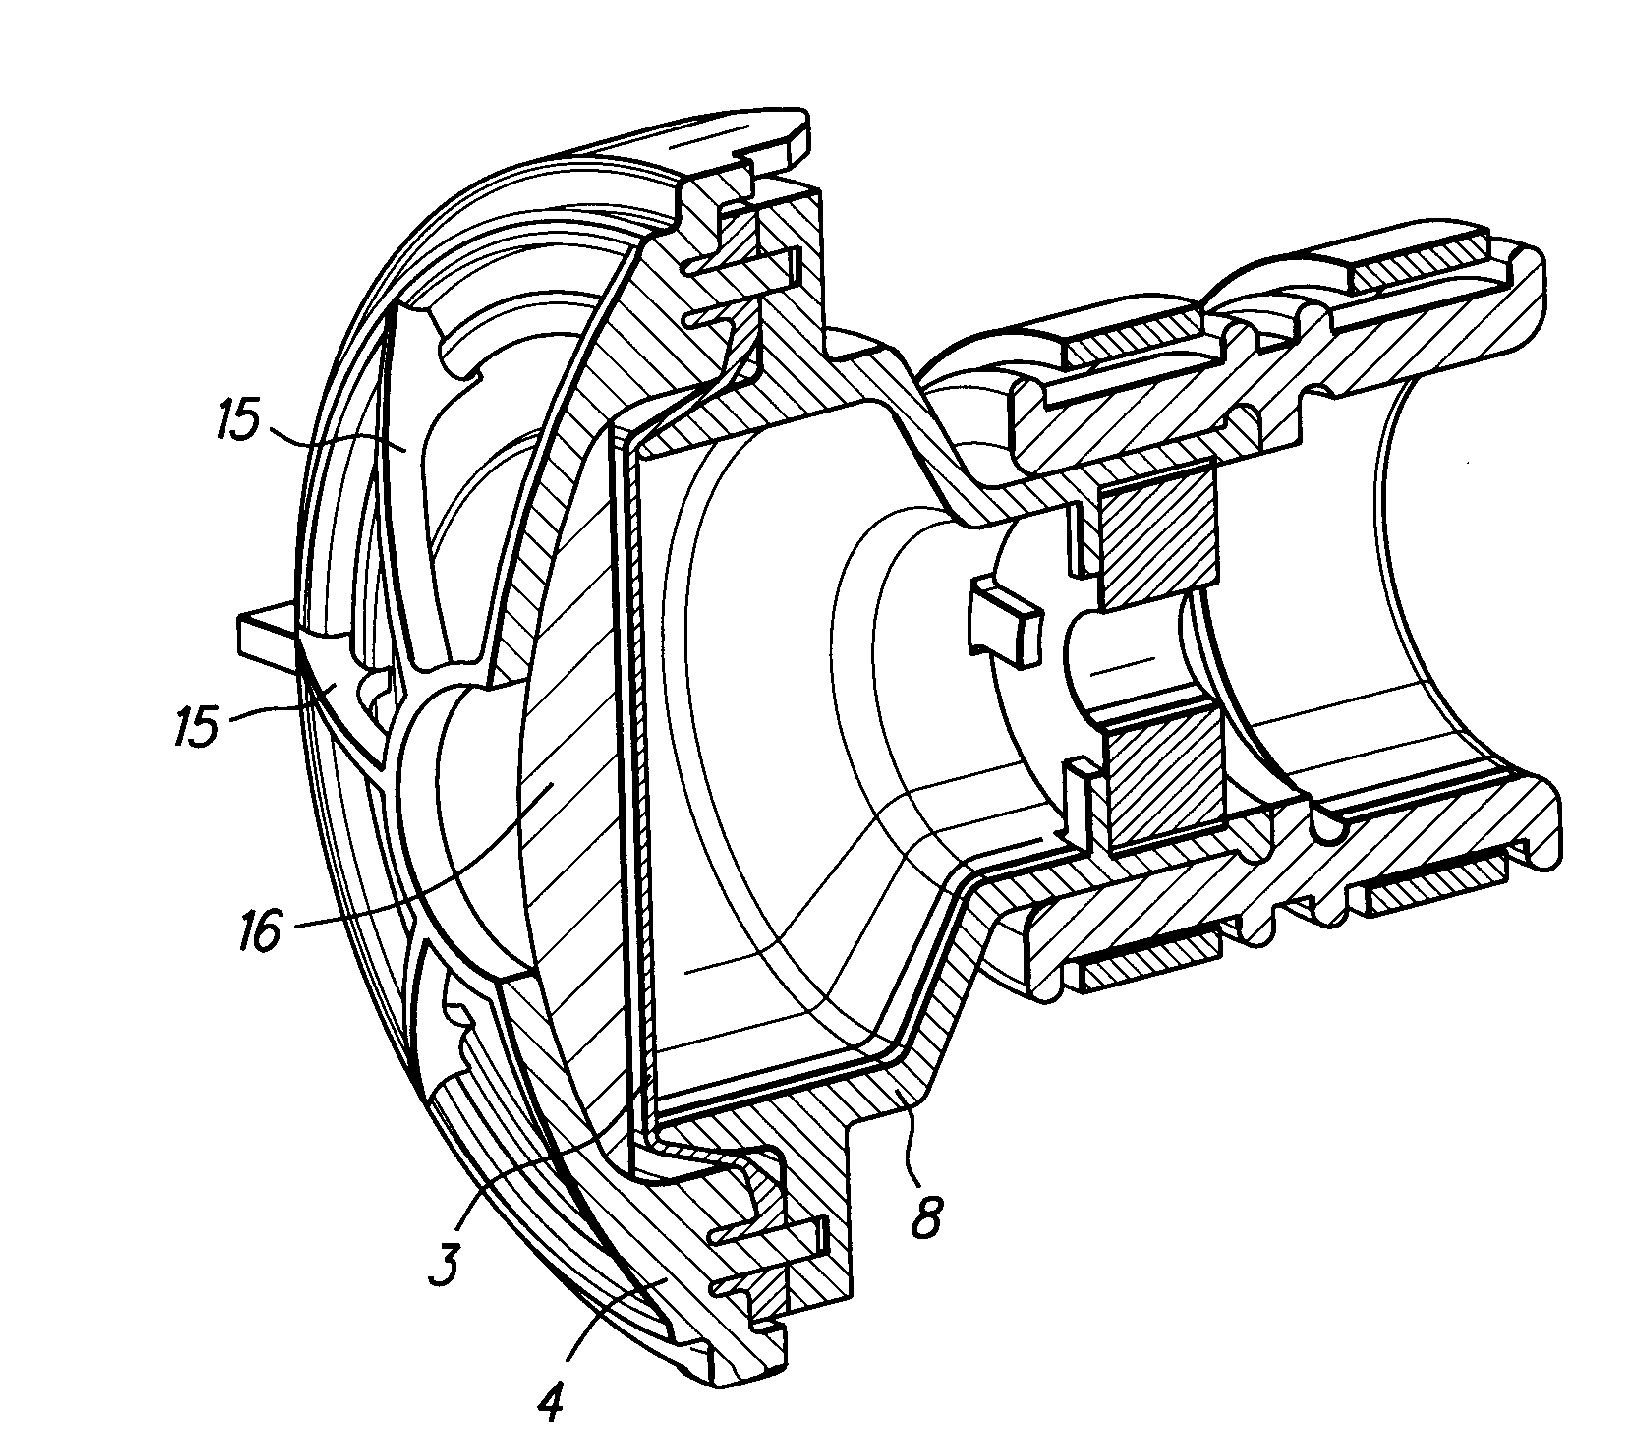 Device for Noise Transmisson in a Motor Vehicle